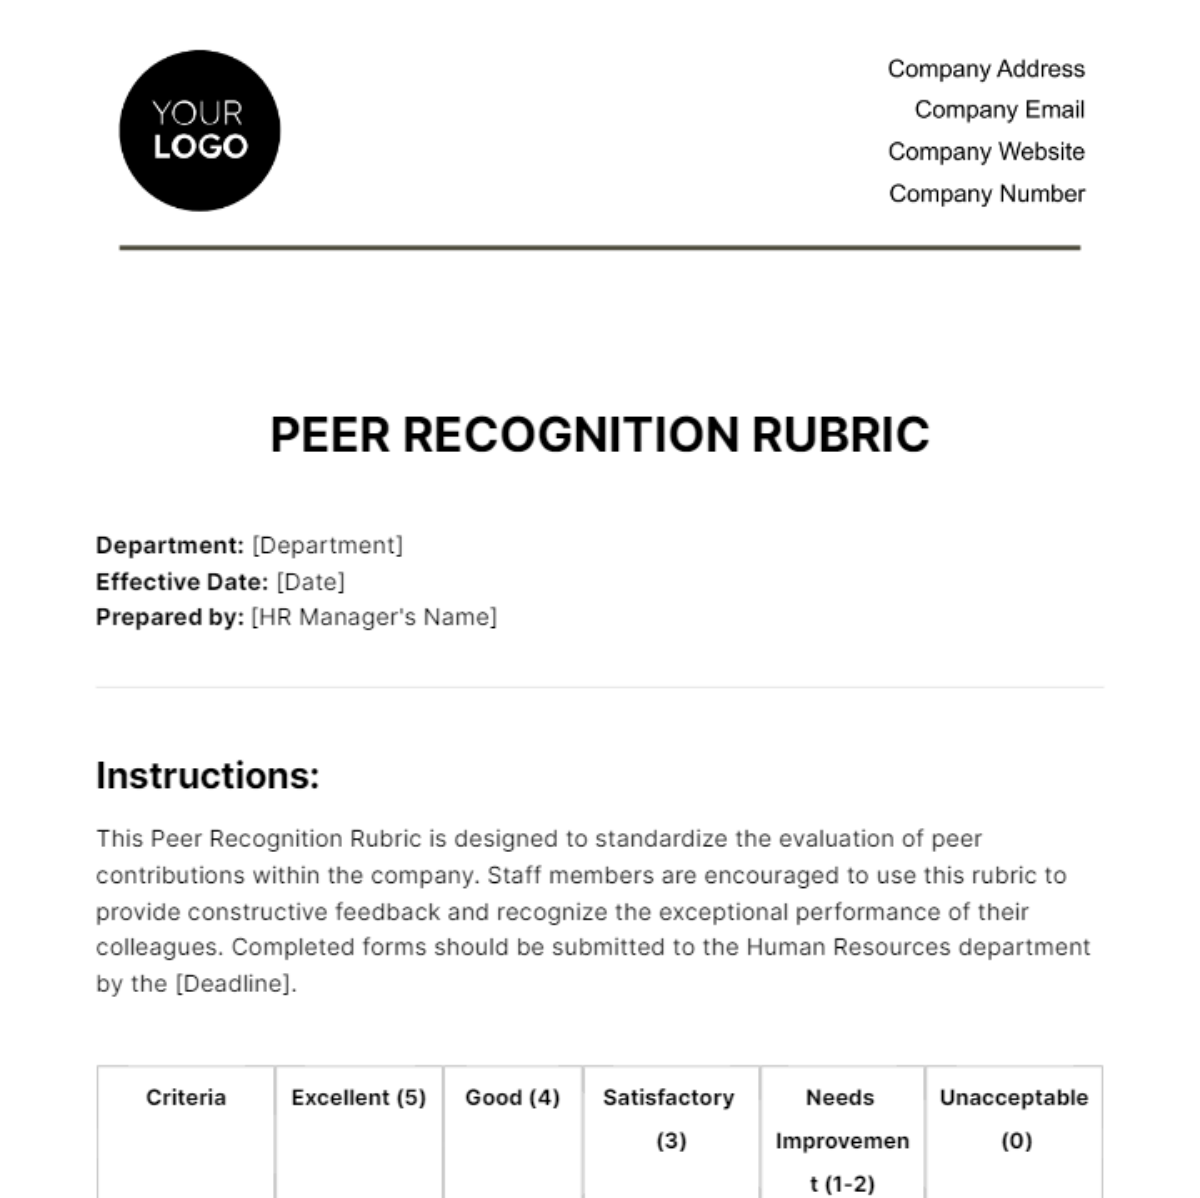 Peer Recognition Rubric HR Template